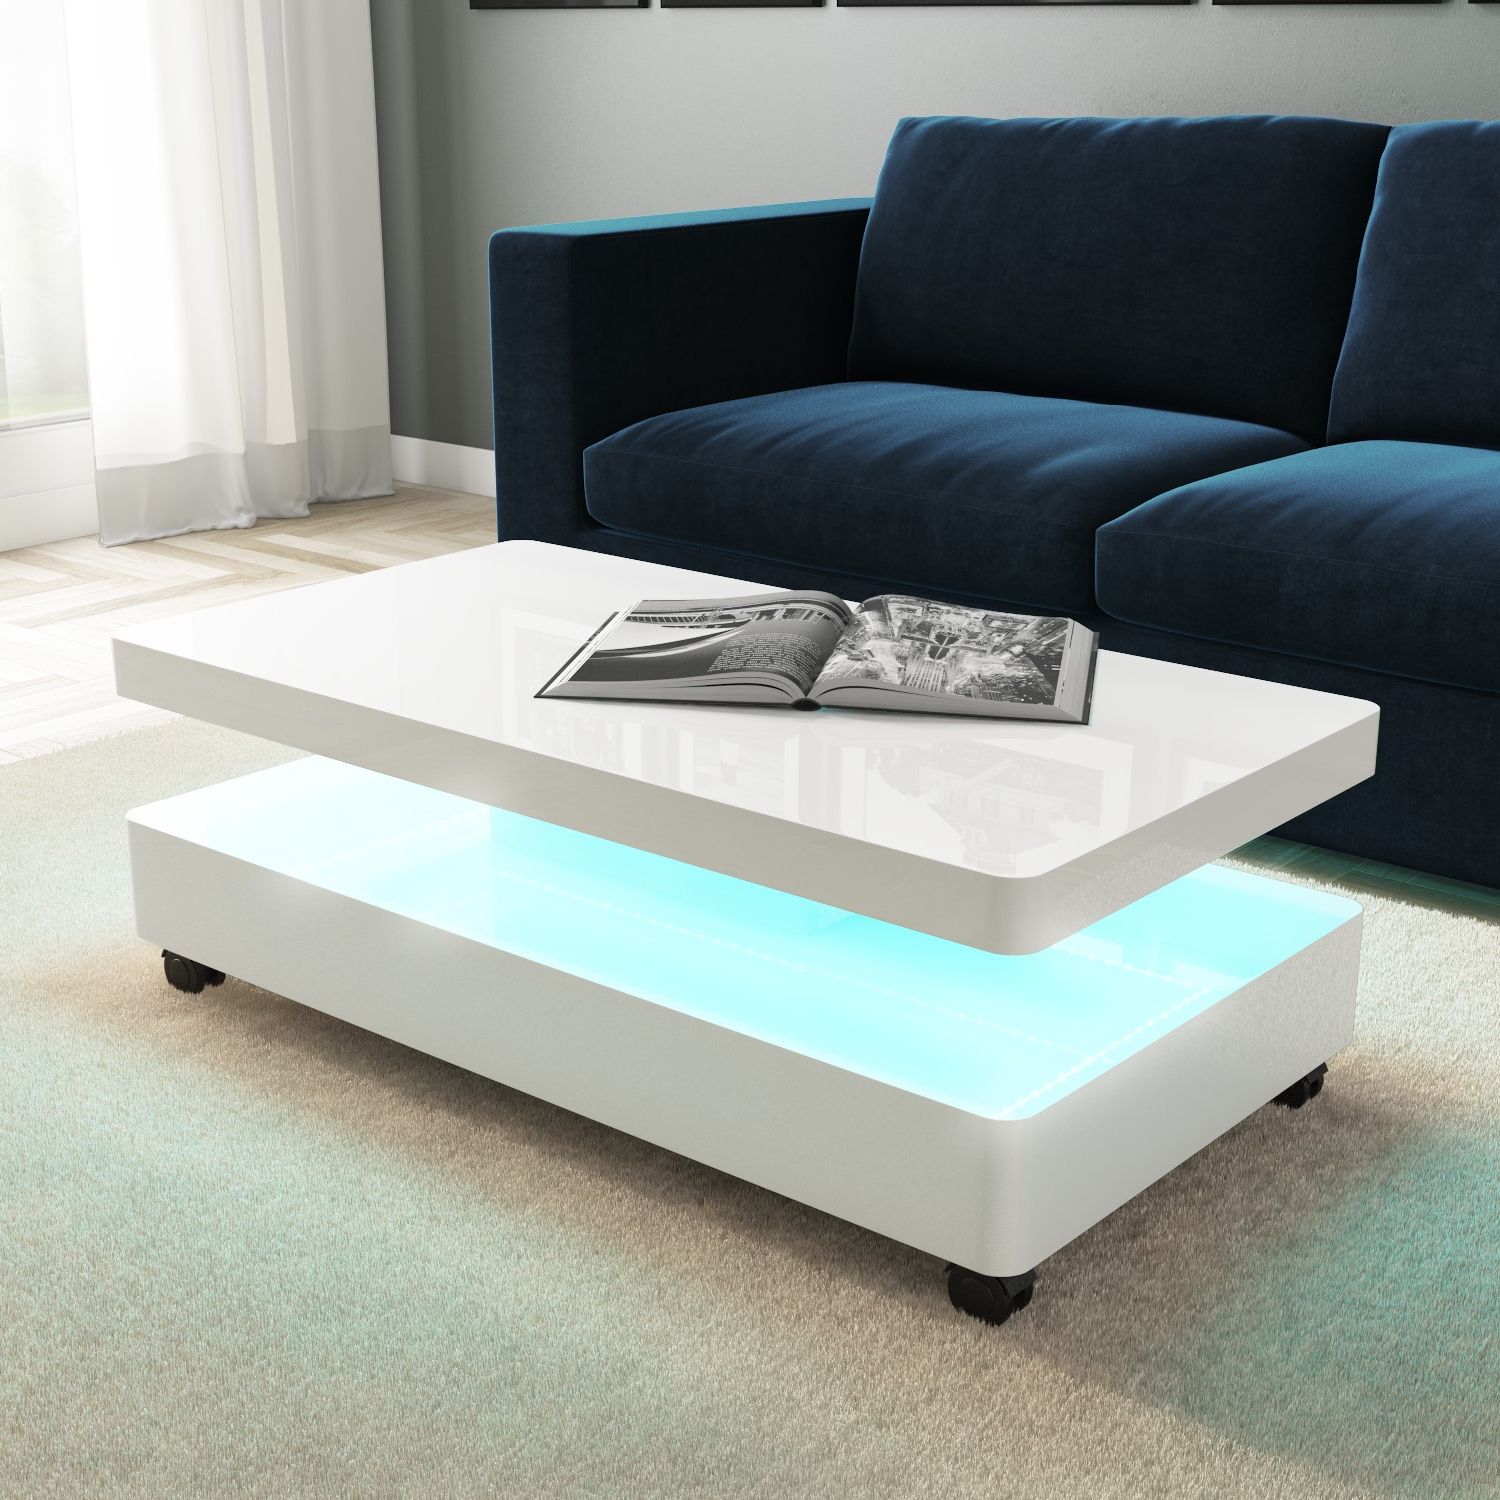 Widely Used Coffee Tables With Drawers And Led Lights Inside High Gloss White Coffee Table With Led Lighting  (View 7 of 15)